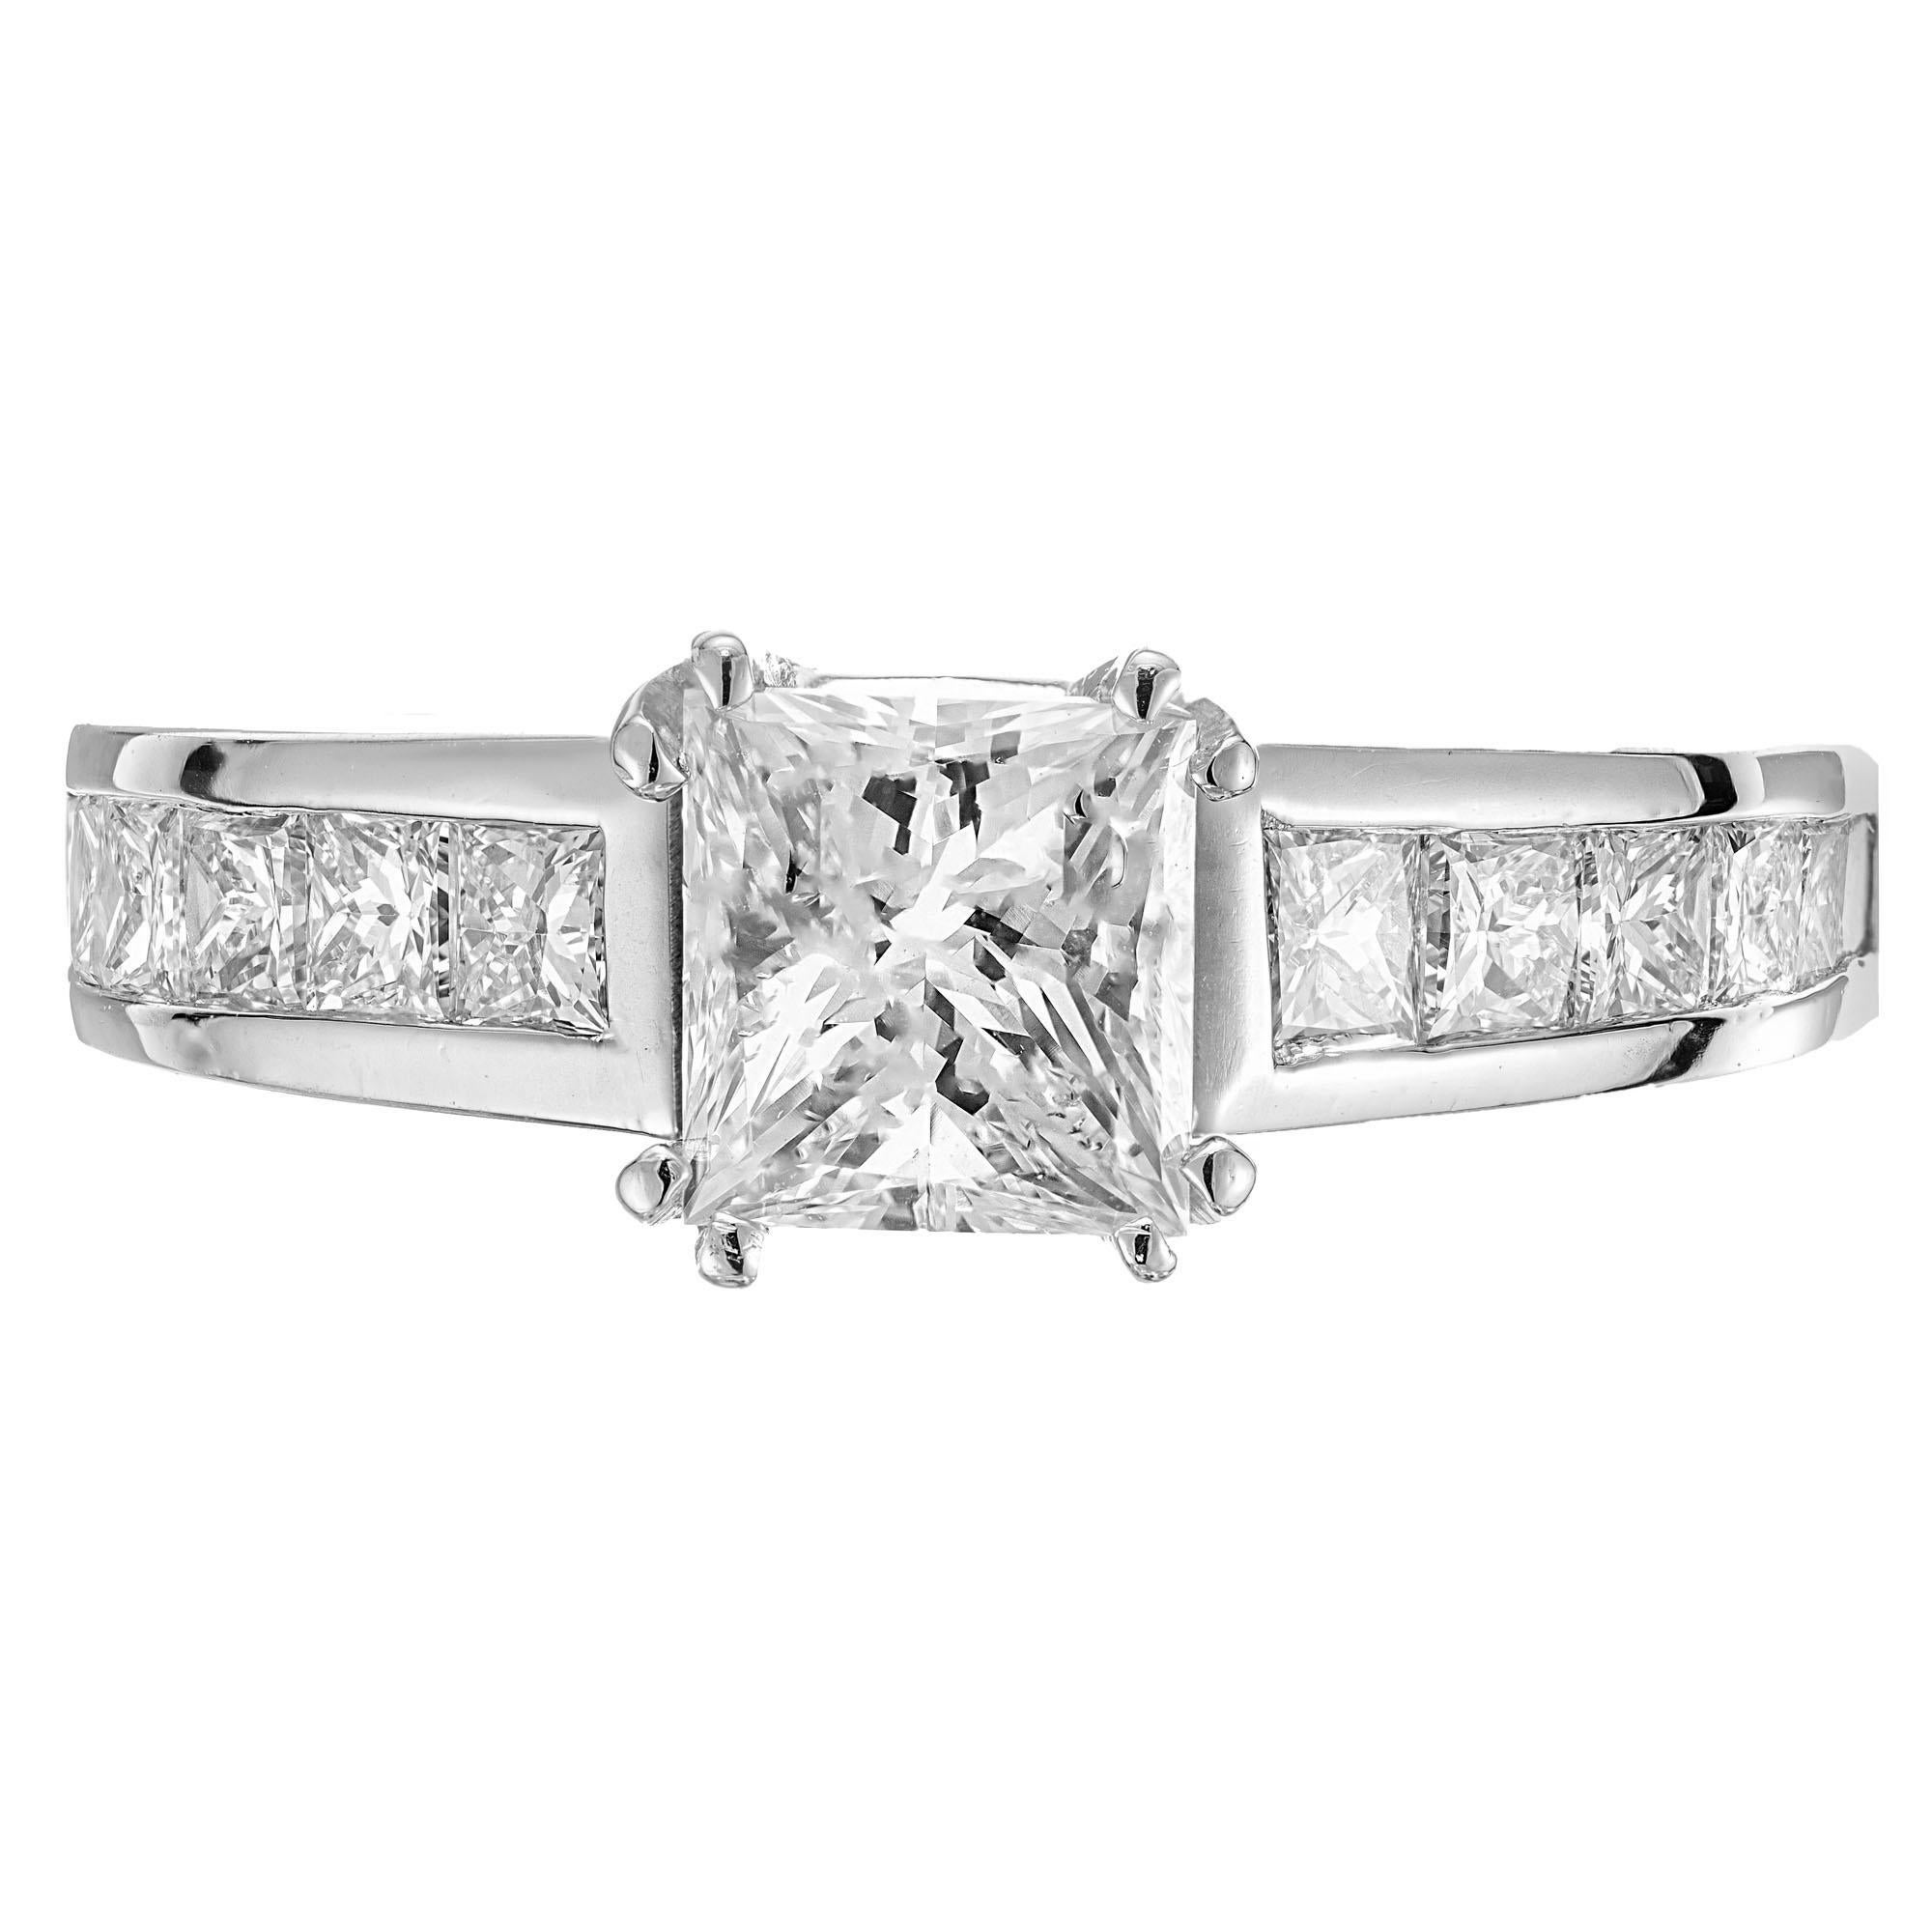 Diamond engagement ring. GIA certified princess cut diamond center stone set in platinum with 12 princess cut accent diamonds. Designed and crafted in the Peter Suchy workshop.

1 princess cut diamond, D VS2 approx. 1.00cts GIA Certificate #